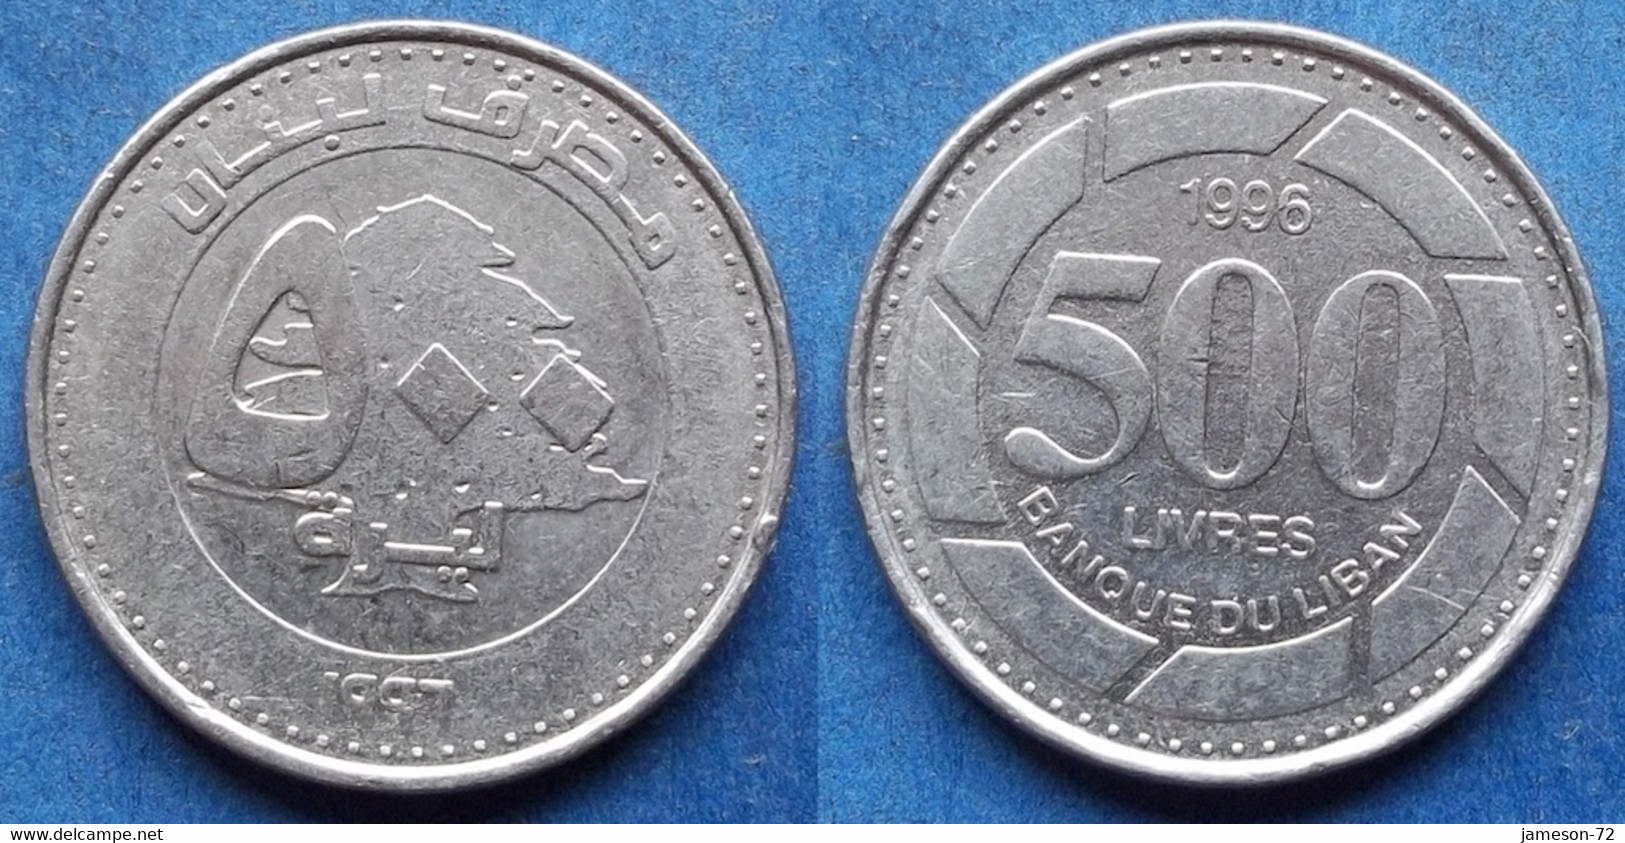 LEBANON - 500 Livres 1996 KM# 39 Independent Republic Asia - Edelweiss Coins - Liban